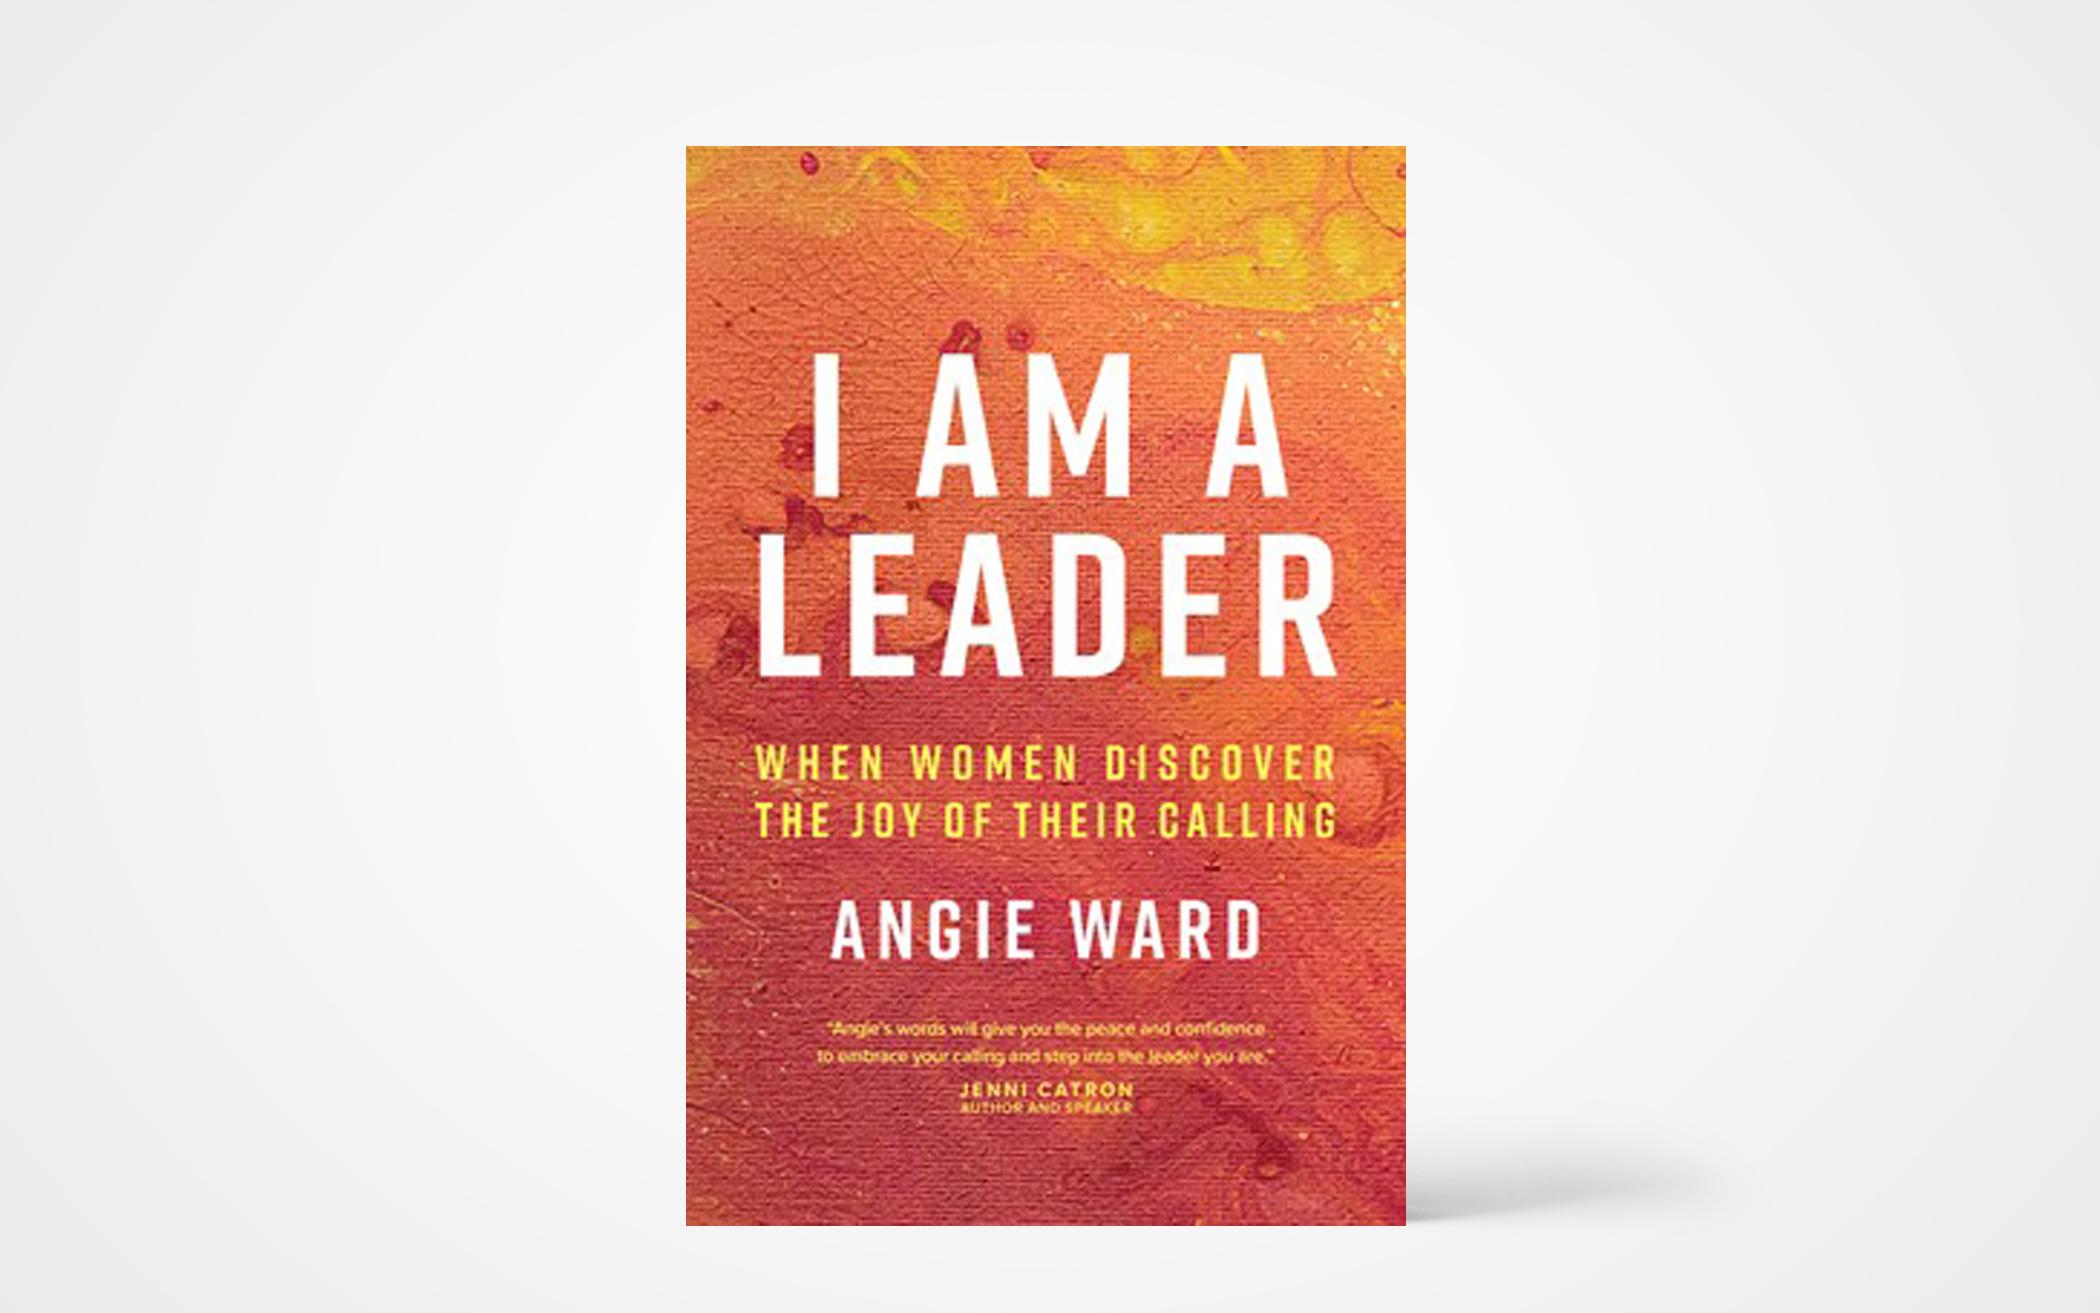 I Am a Leader: When Women Discover the Joy of Their Calling